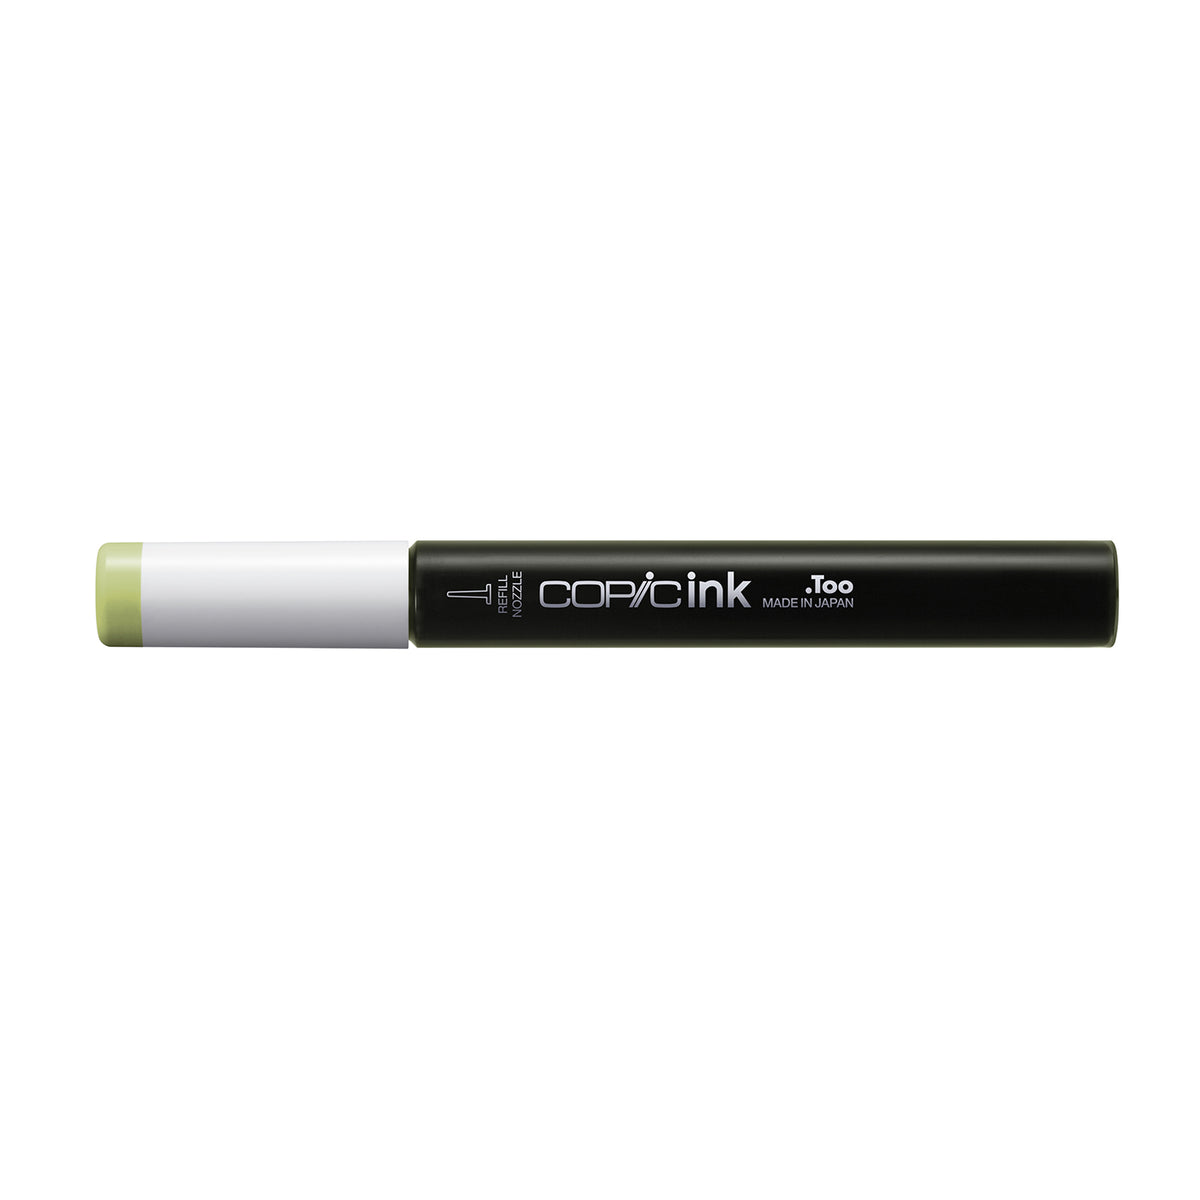 Copic Ink YG03-Yellow Green